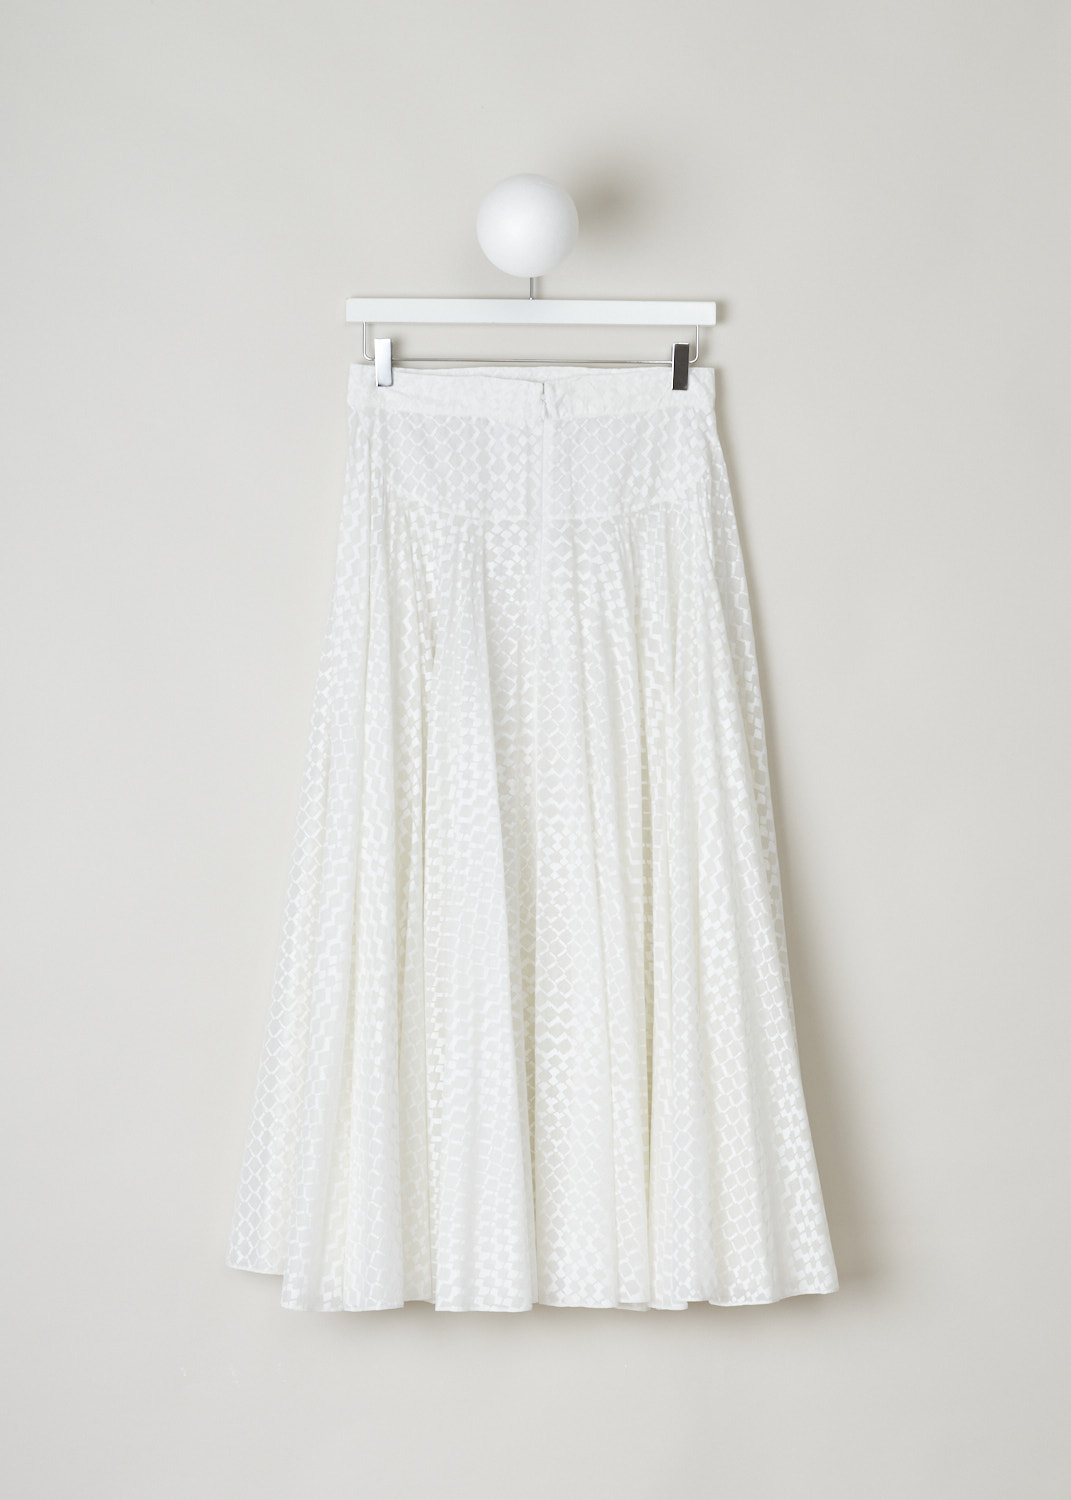 AlaÃ¯a, Off-white slightly see-through tulle skirt, AS9J648TT314_C000_blanc, white, back, Made from thinly woven cotton and is slightly see-through, embellished with a white lozenge motif. The length of the skirt comes to about ankle height.